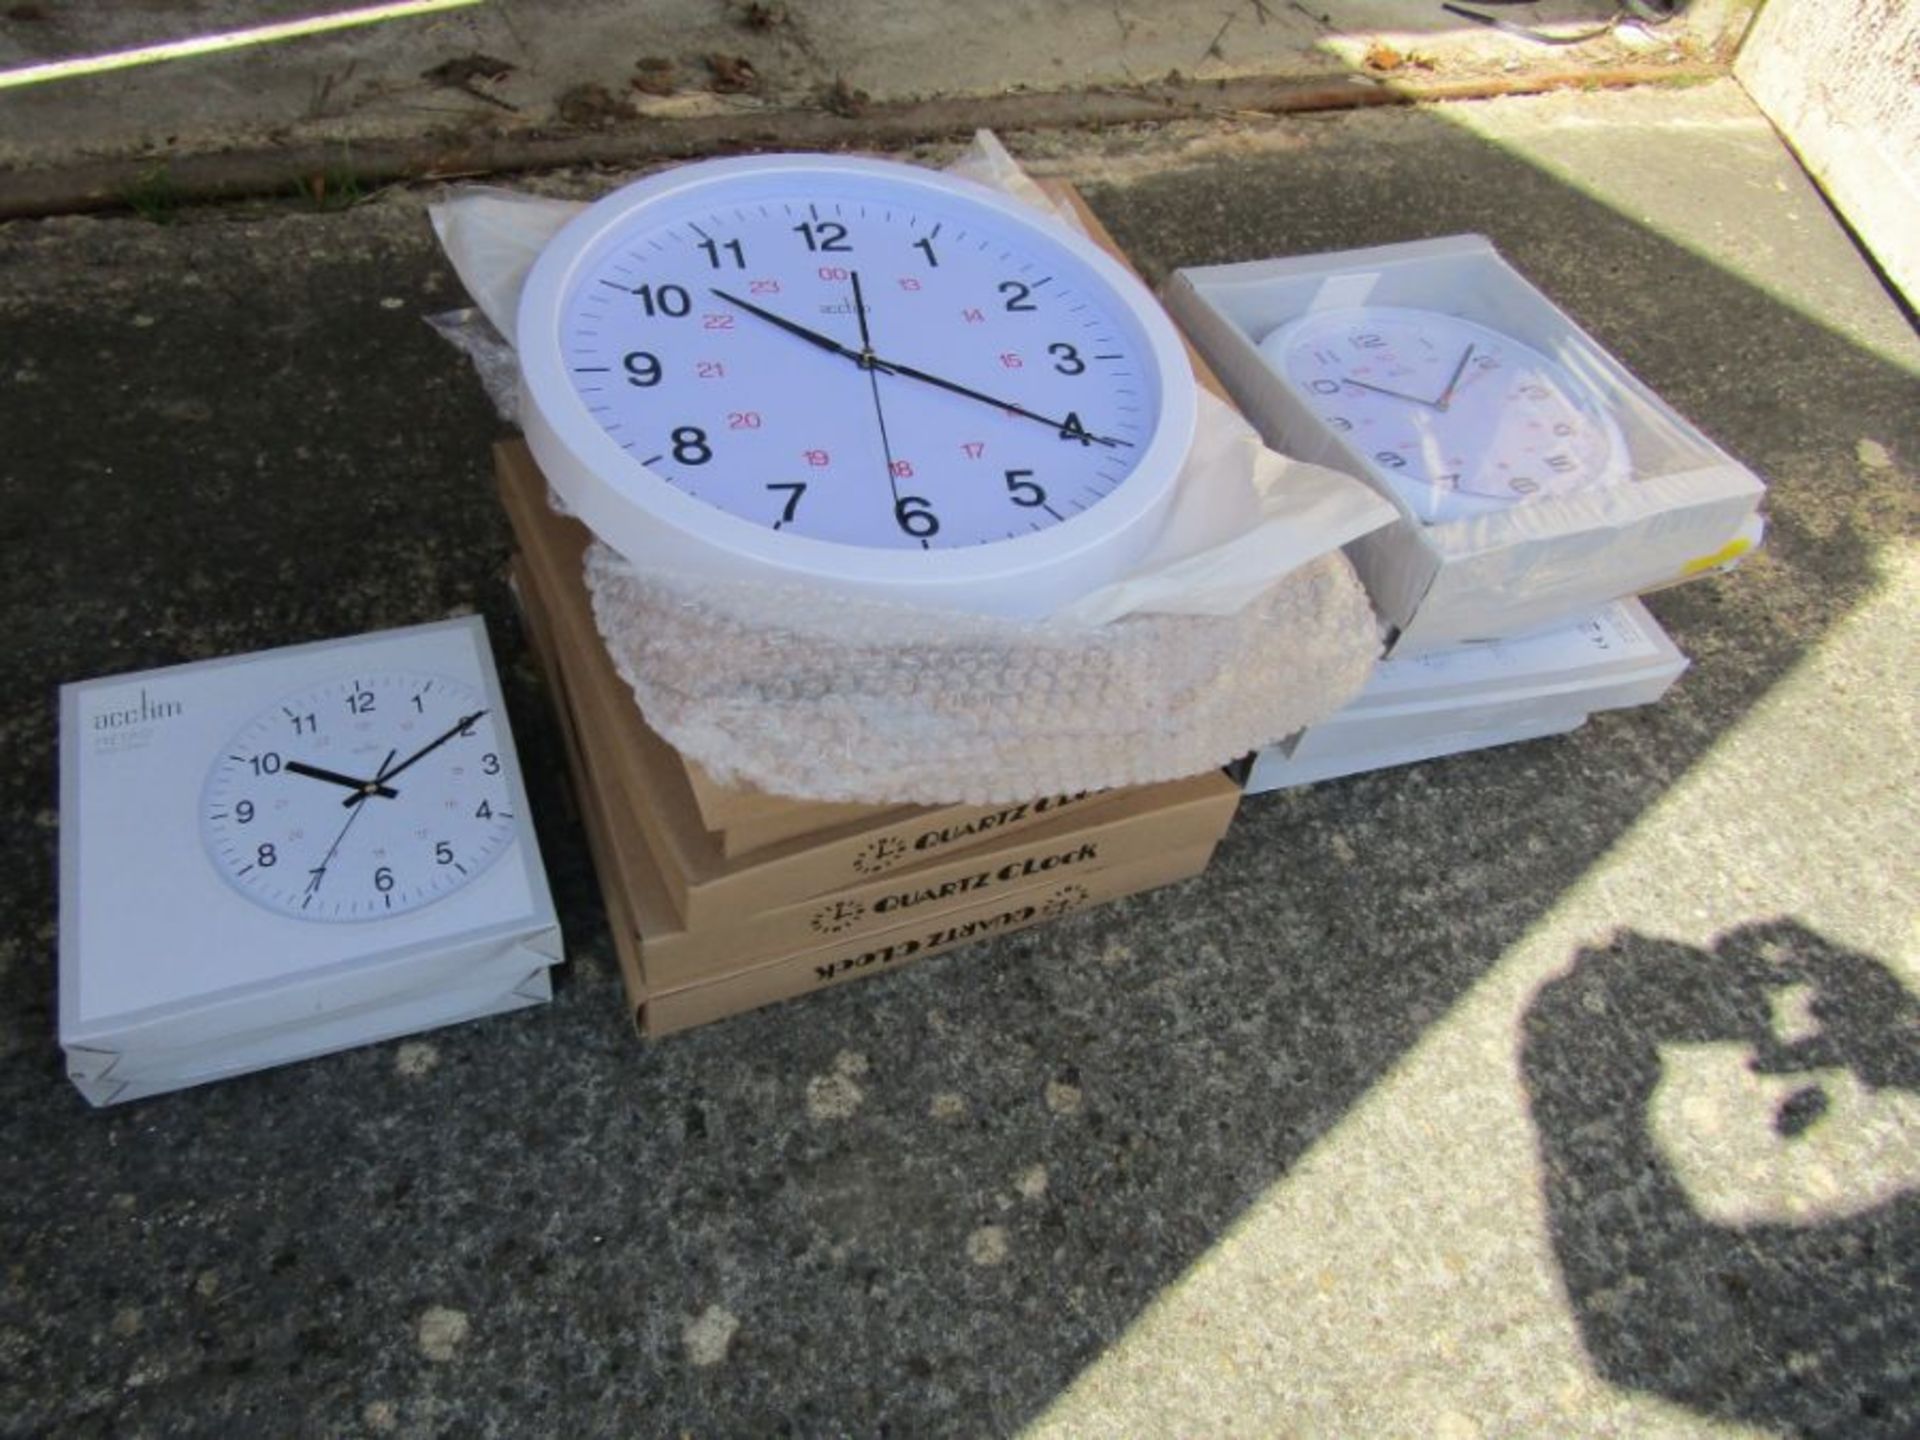 17 x White 24 hour track wall clocks - 3 different sizes 225 - 300mm H7